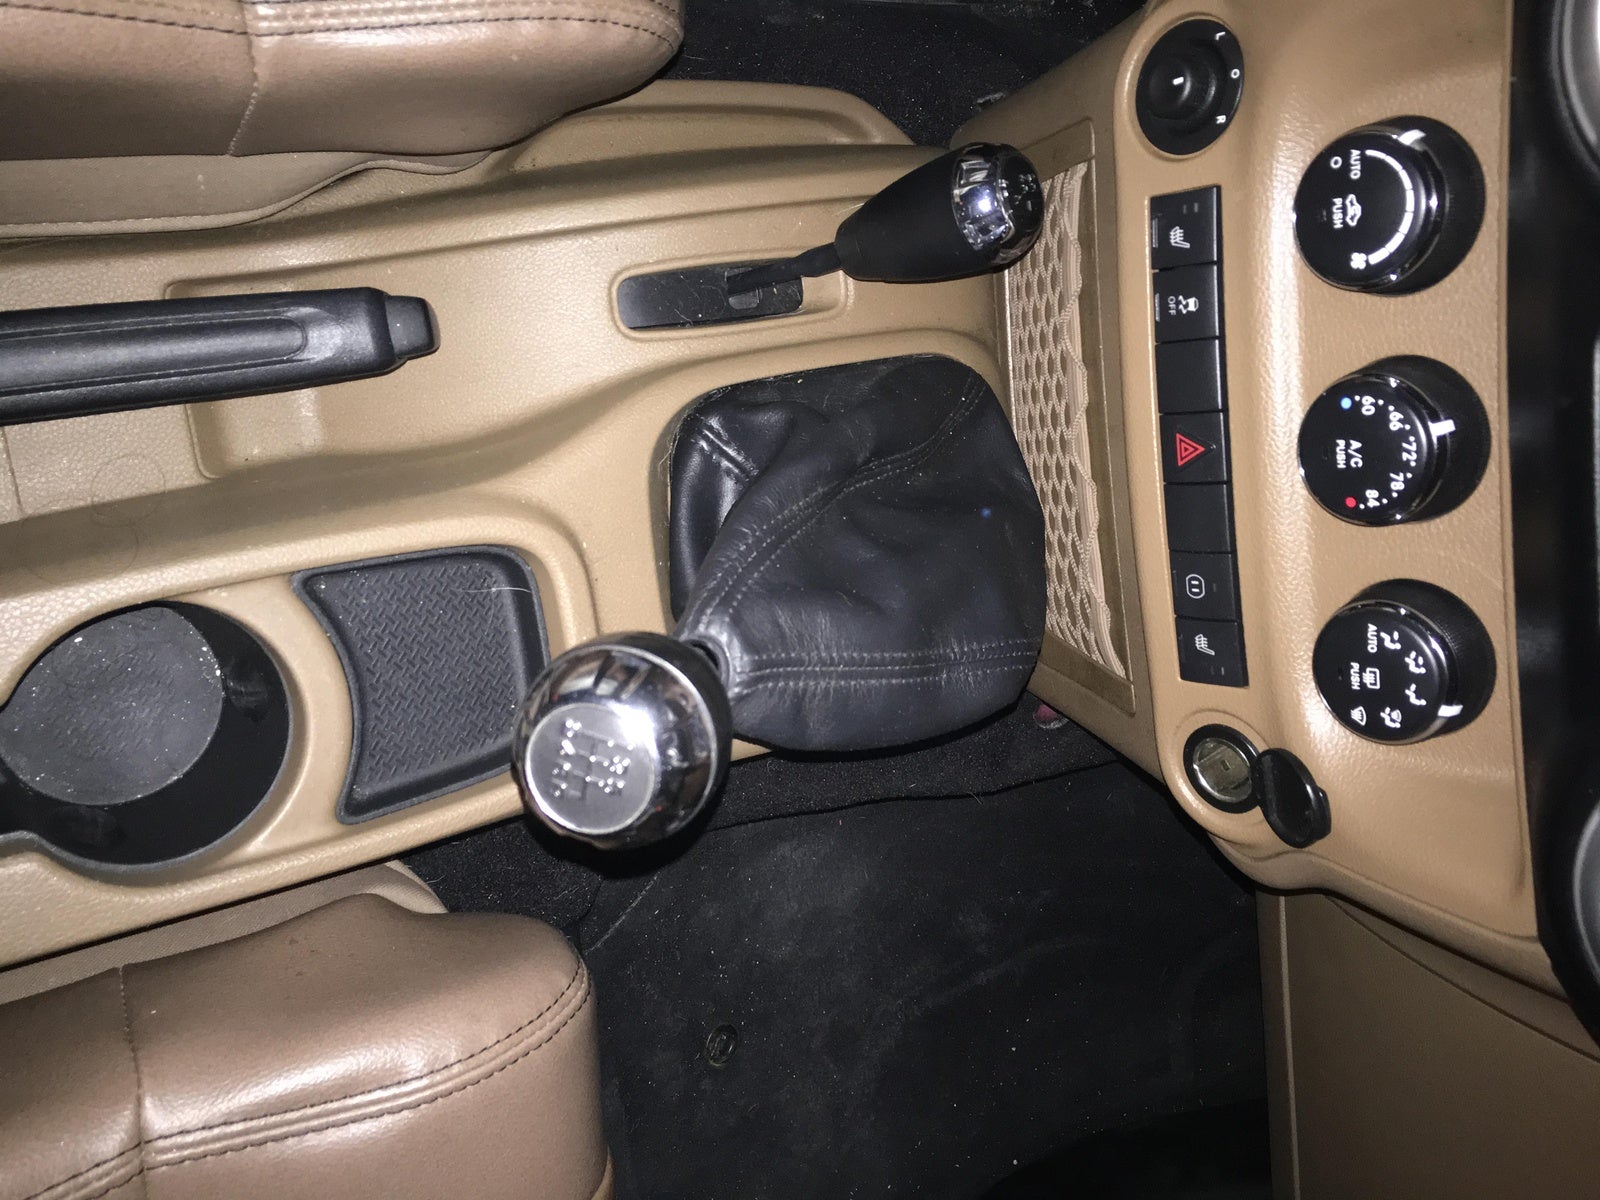 Jeep Wrangler Questions - Squiggly line dashboard Jeep Wrangler - CarGurus